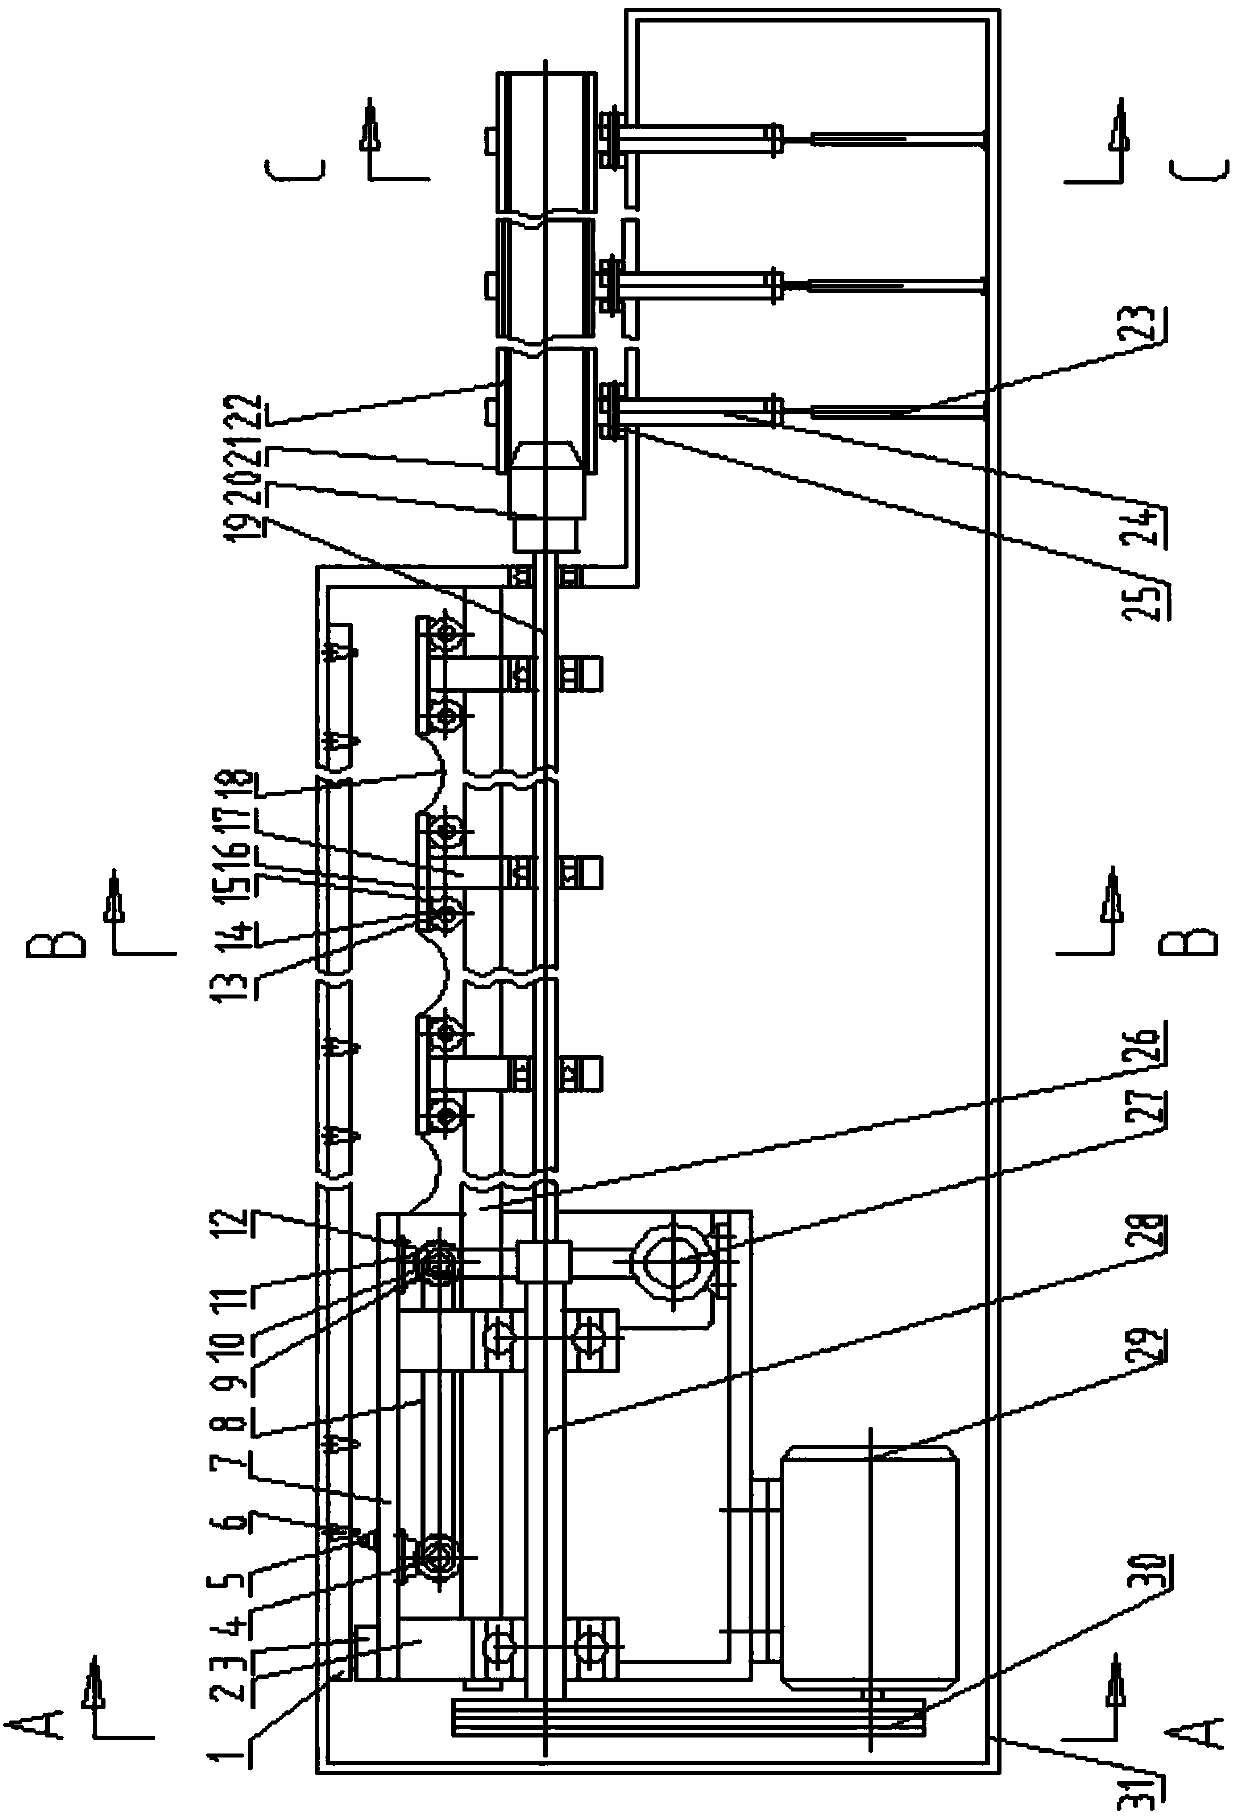 Internal forward spinning nested process composite machine tool with dual metal tubes